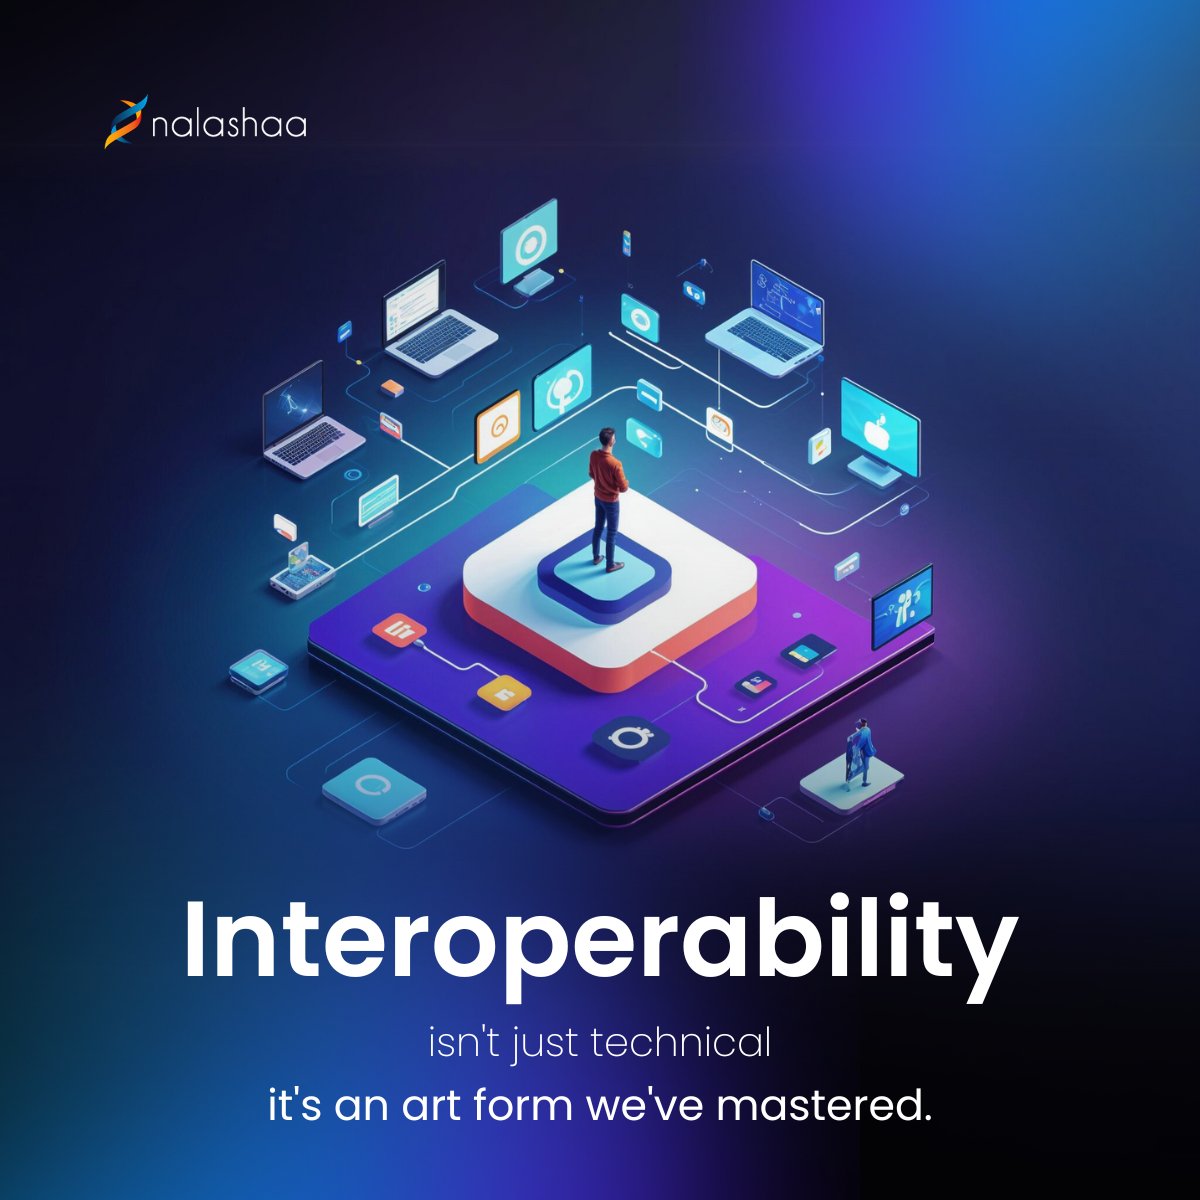 Mastering the art of interoperability to connect healthcare like never before. 

Join us in shaping seamless integrations. 
bit.ly/3vFa0HQ

#HealthTech #Interoperability #HealthcareIT #healthcare #healthcareRegulations #HCAEAS